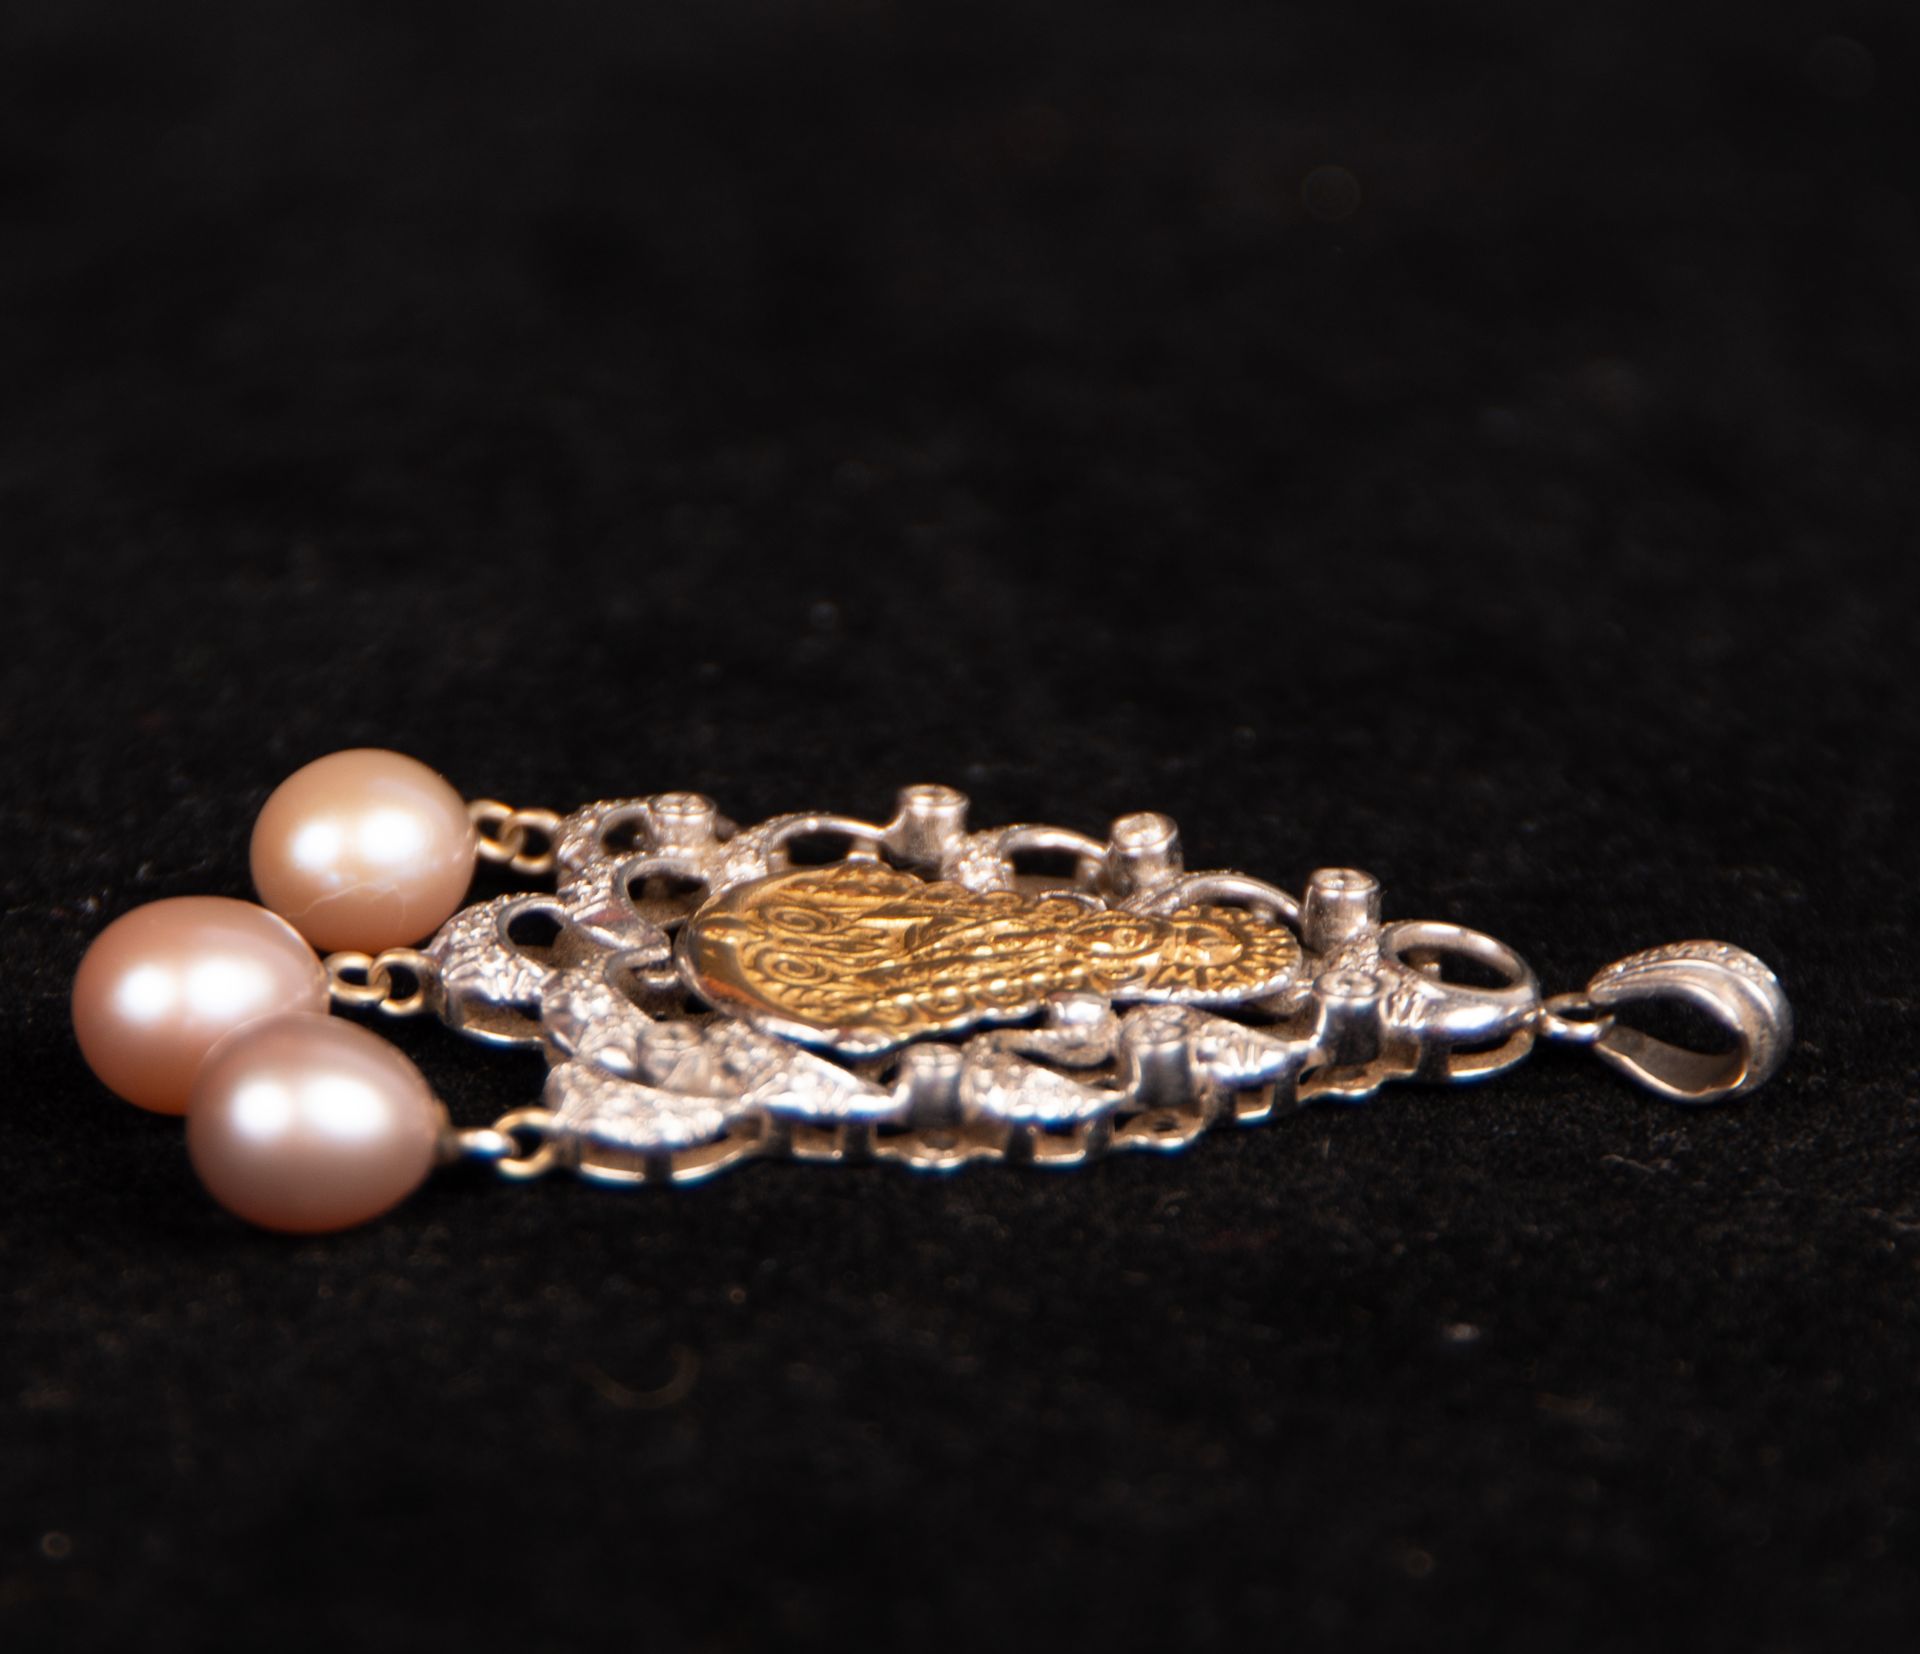 Pendant of the Virgen del Rocío mounted in White Gold, Pearls and Diamonds - Image 3 of 4